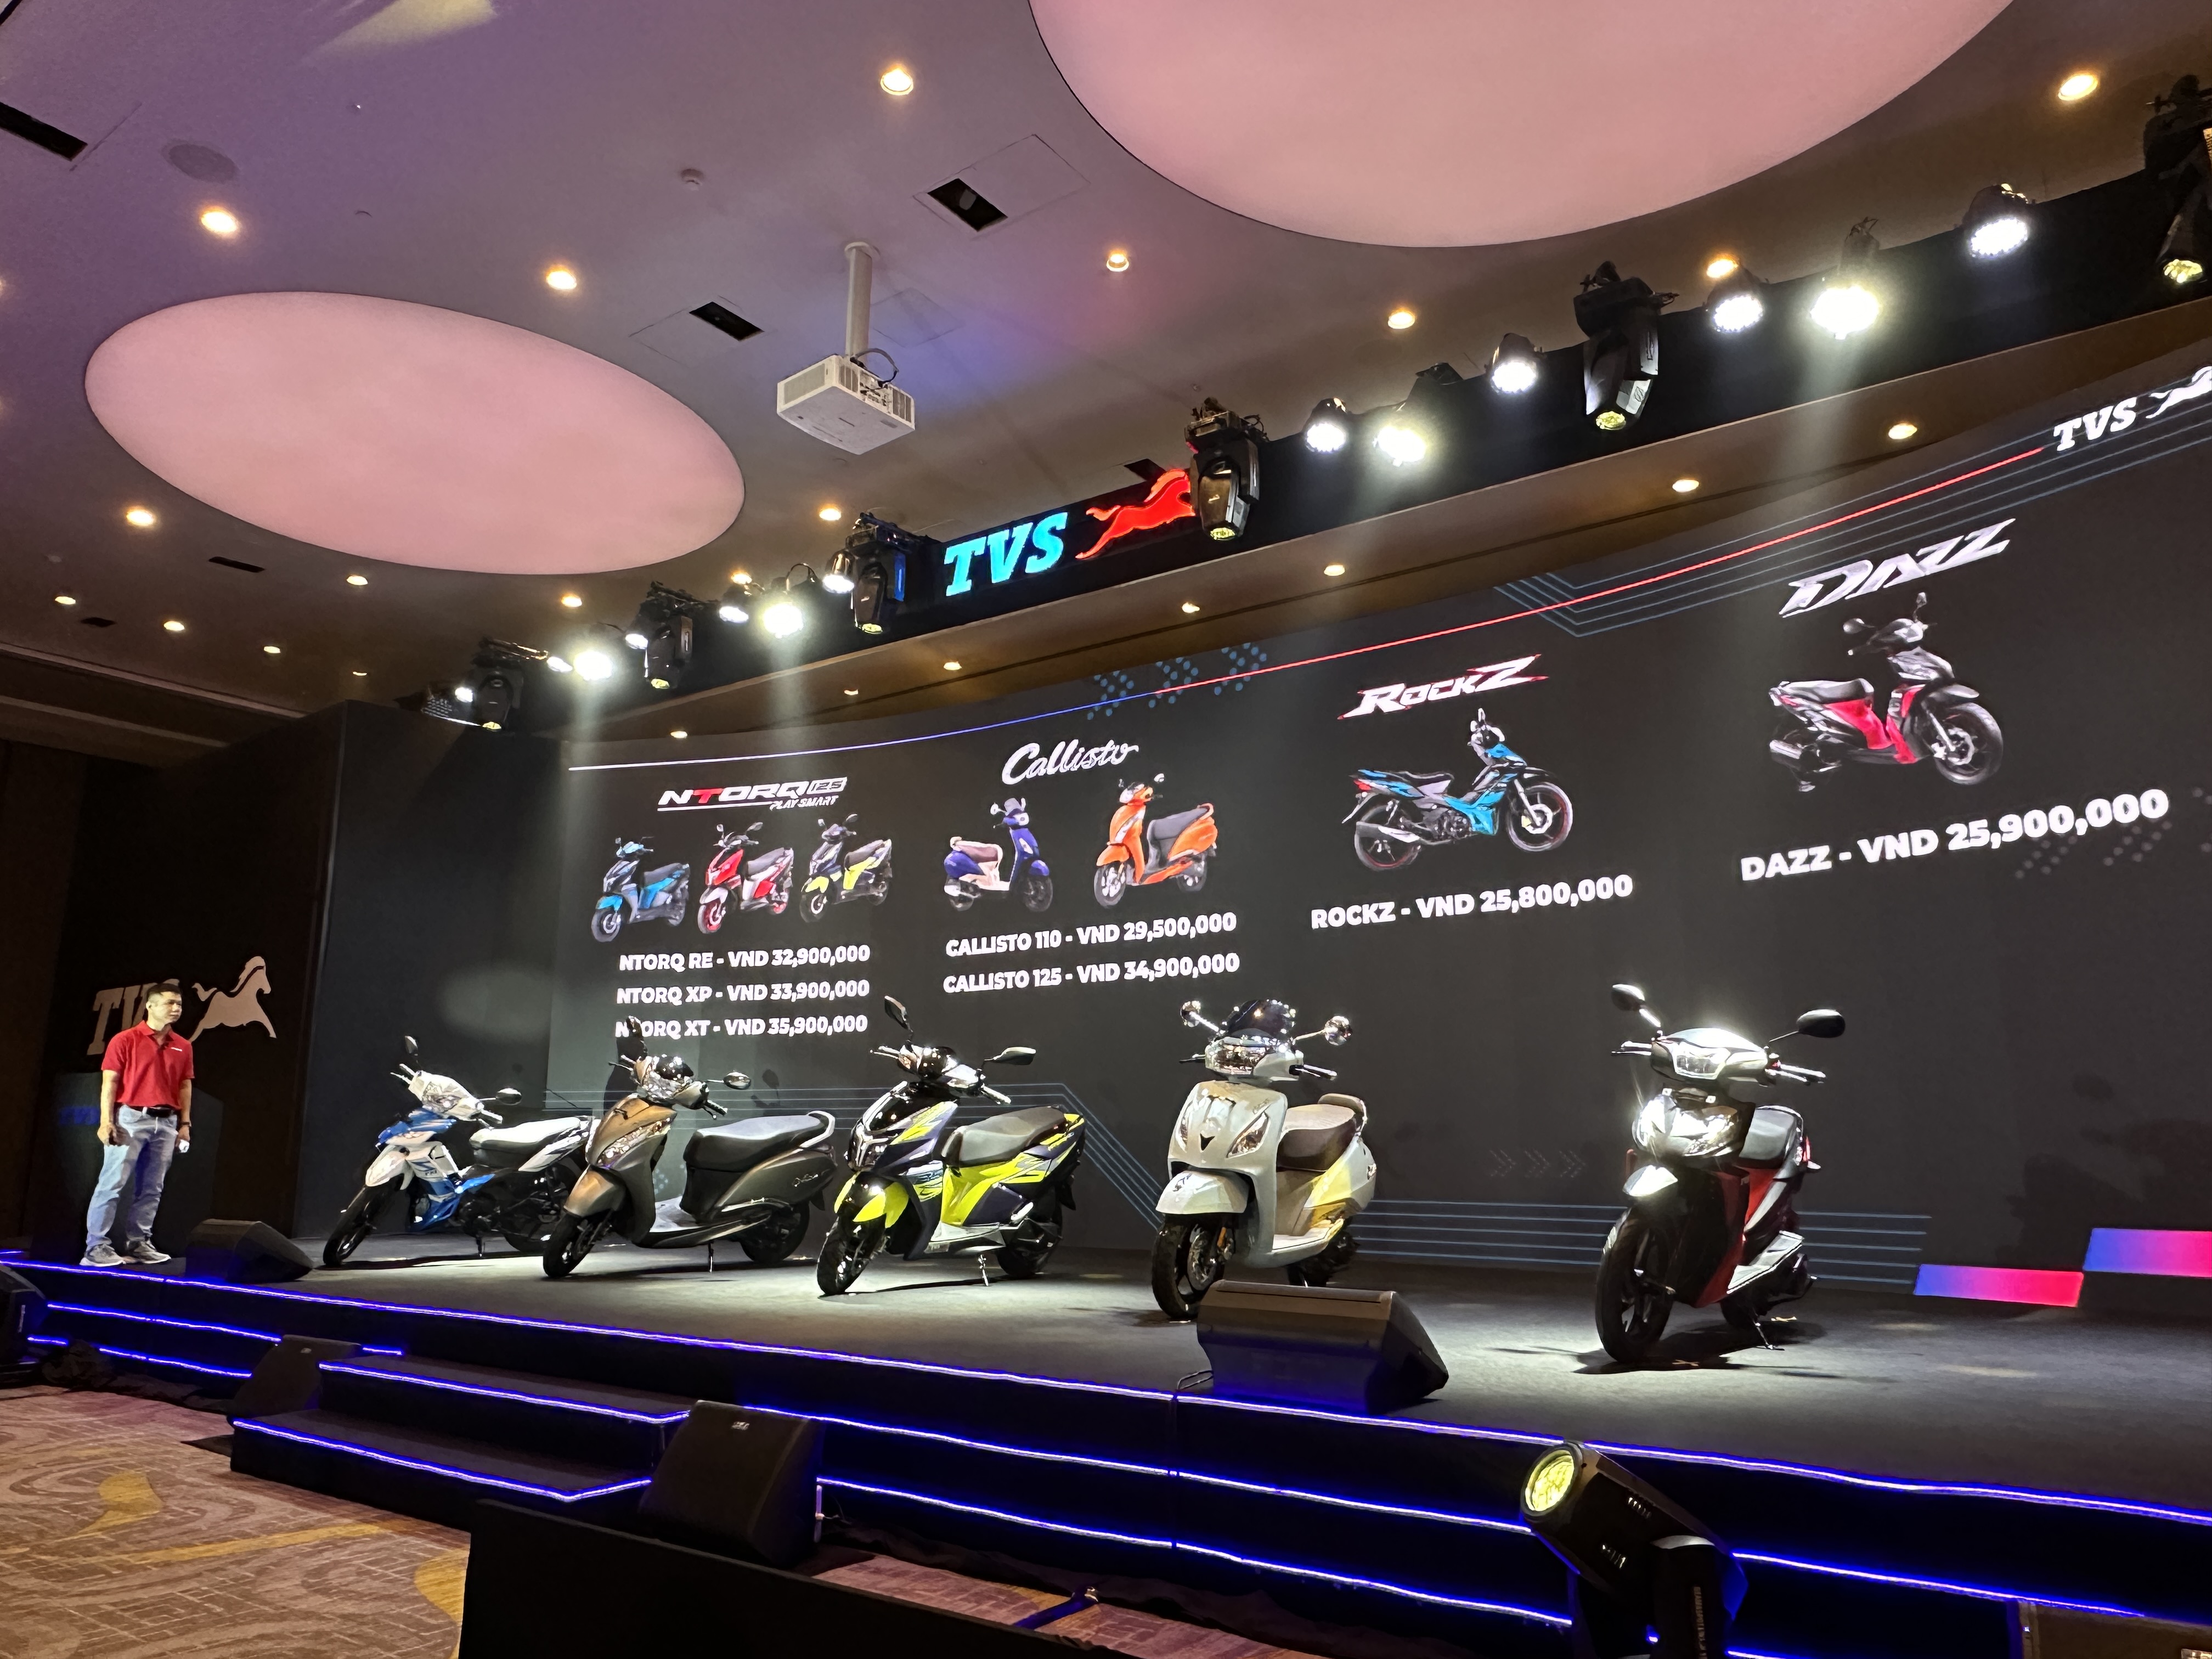 TVS - Indian motorcycles enter the Vietnamese market with 5 models from 110 to 125cc IMG_4183.JPG